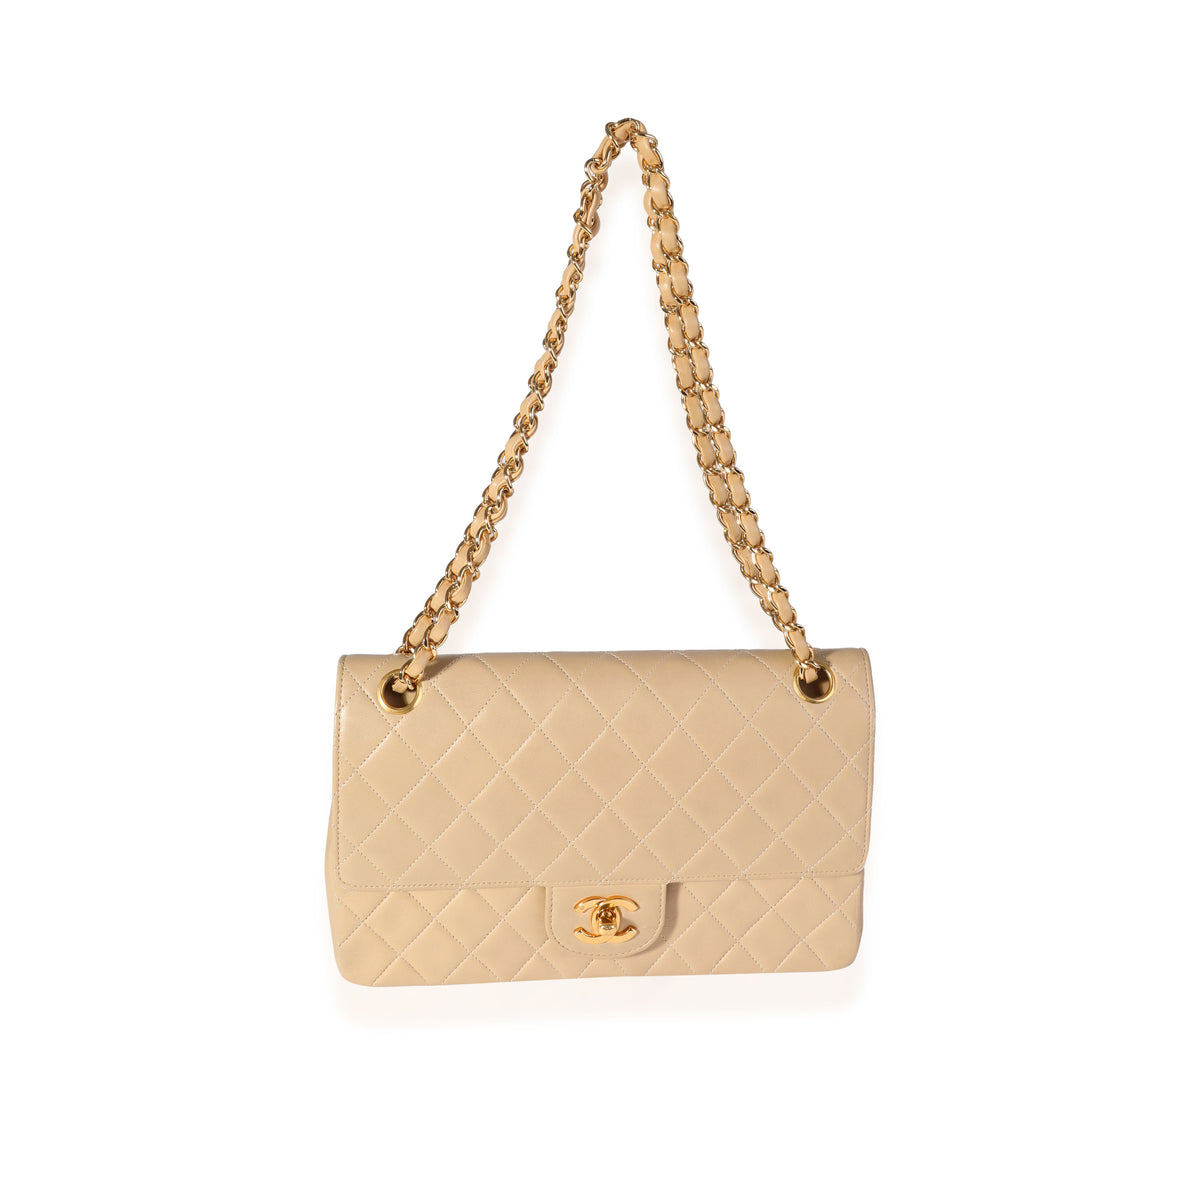 Chanel Vintage Beige Quilted Lambskin Medium Classic Double Flap